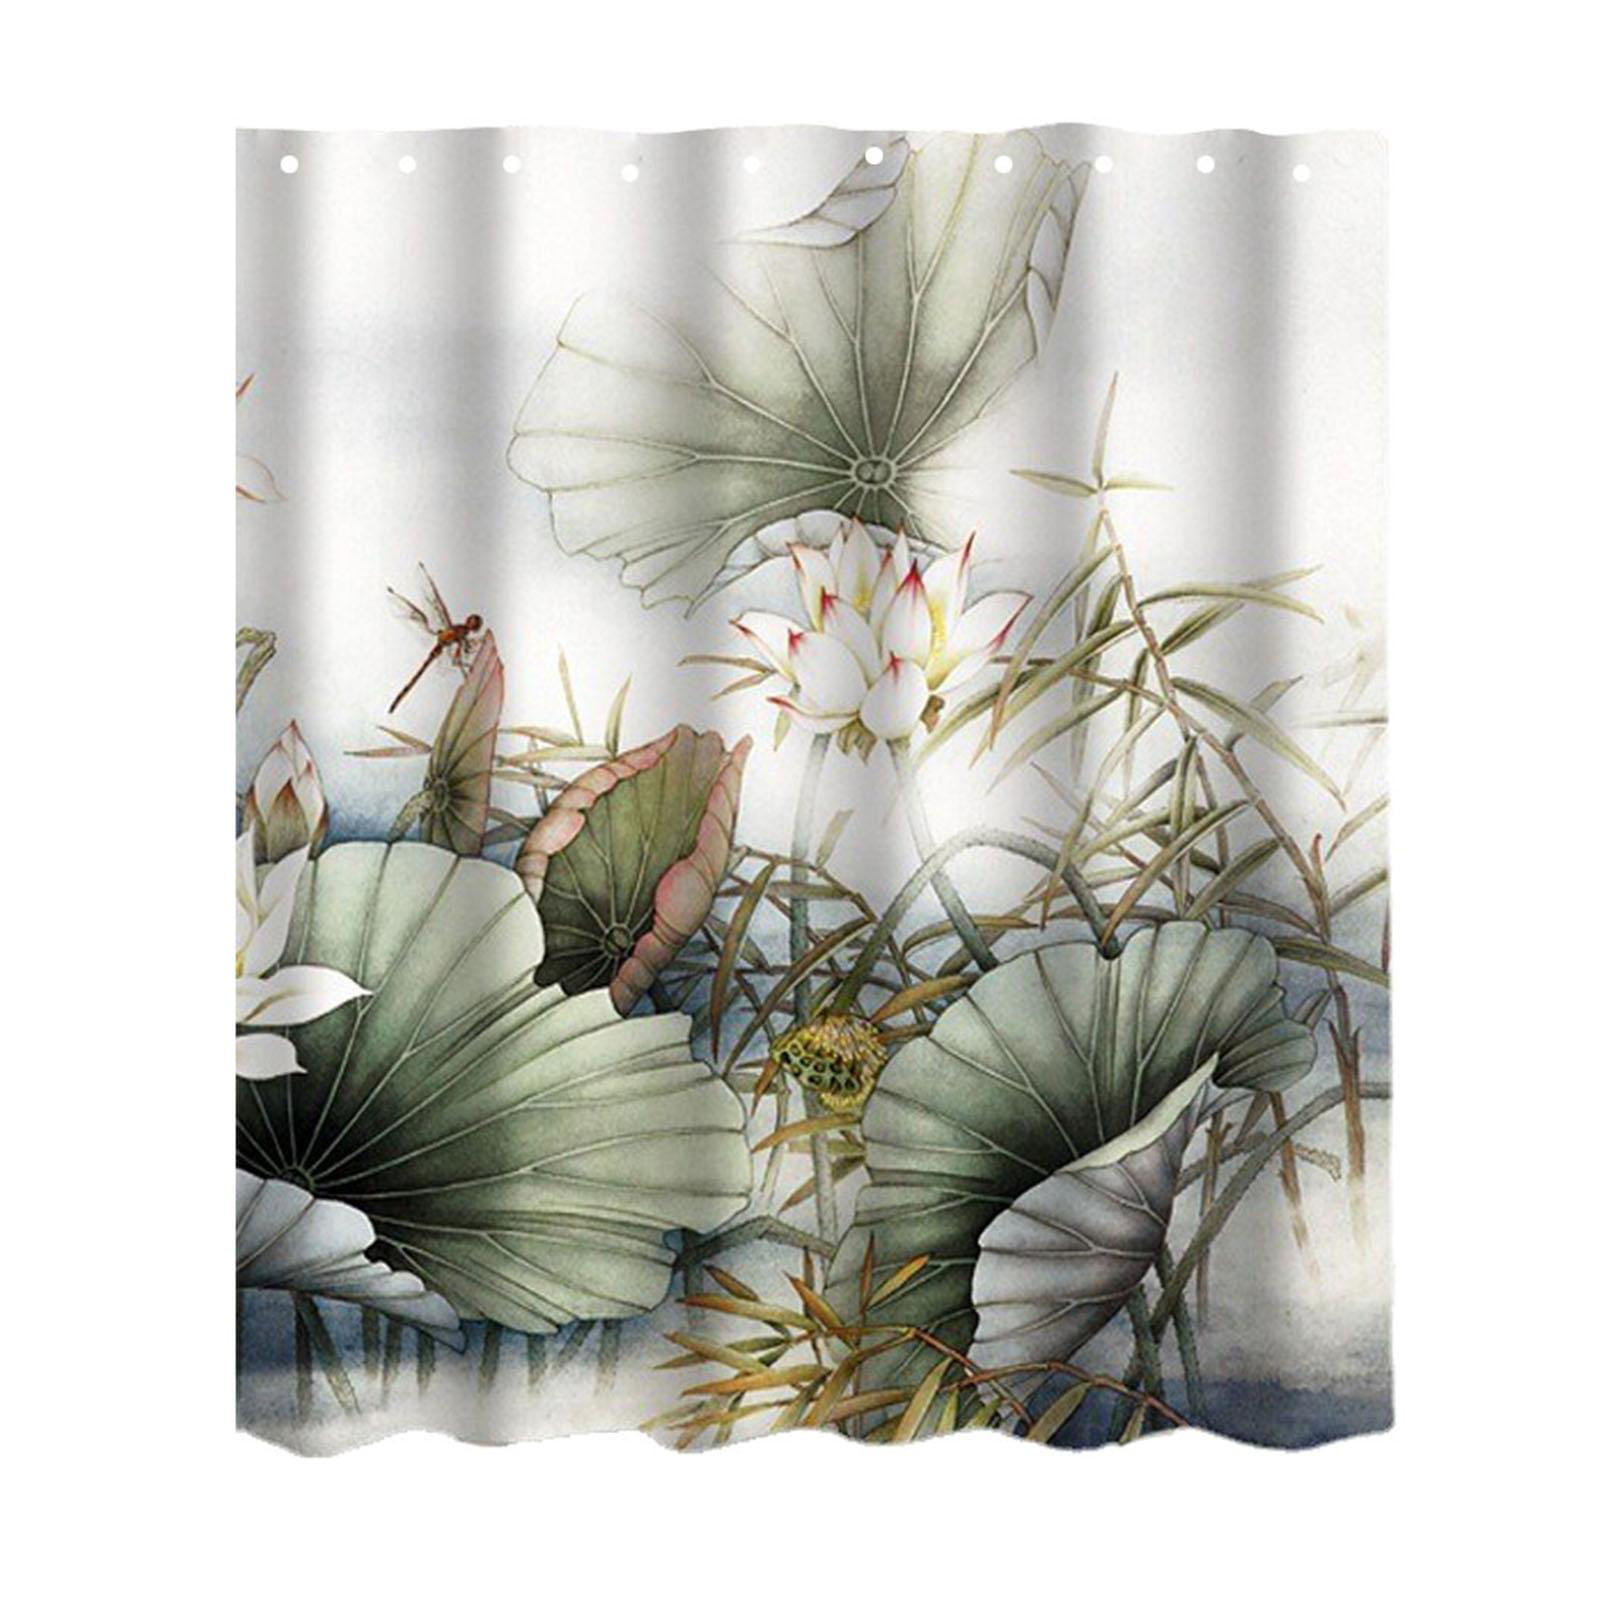 Nature Small Boat In Mountain Lake Polyester Fabric Shower Curtain Set 180x180cm 